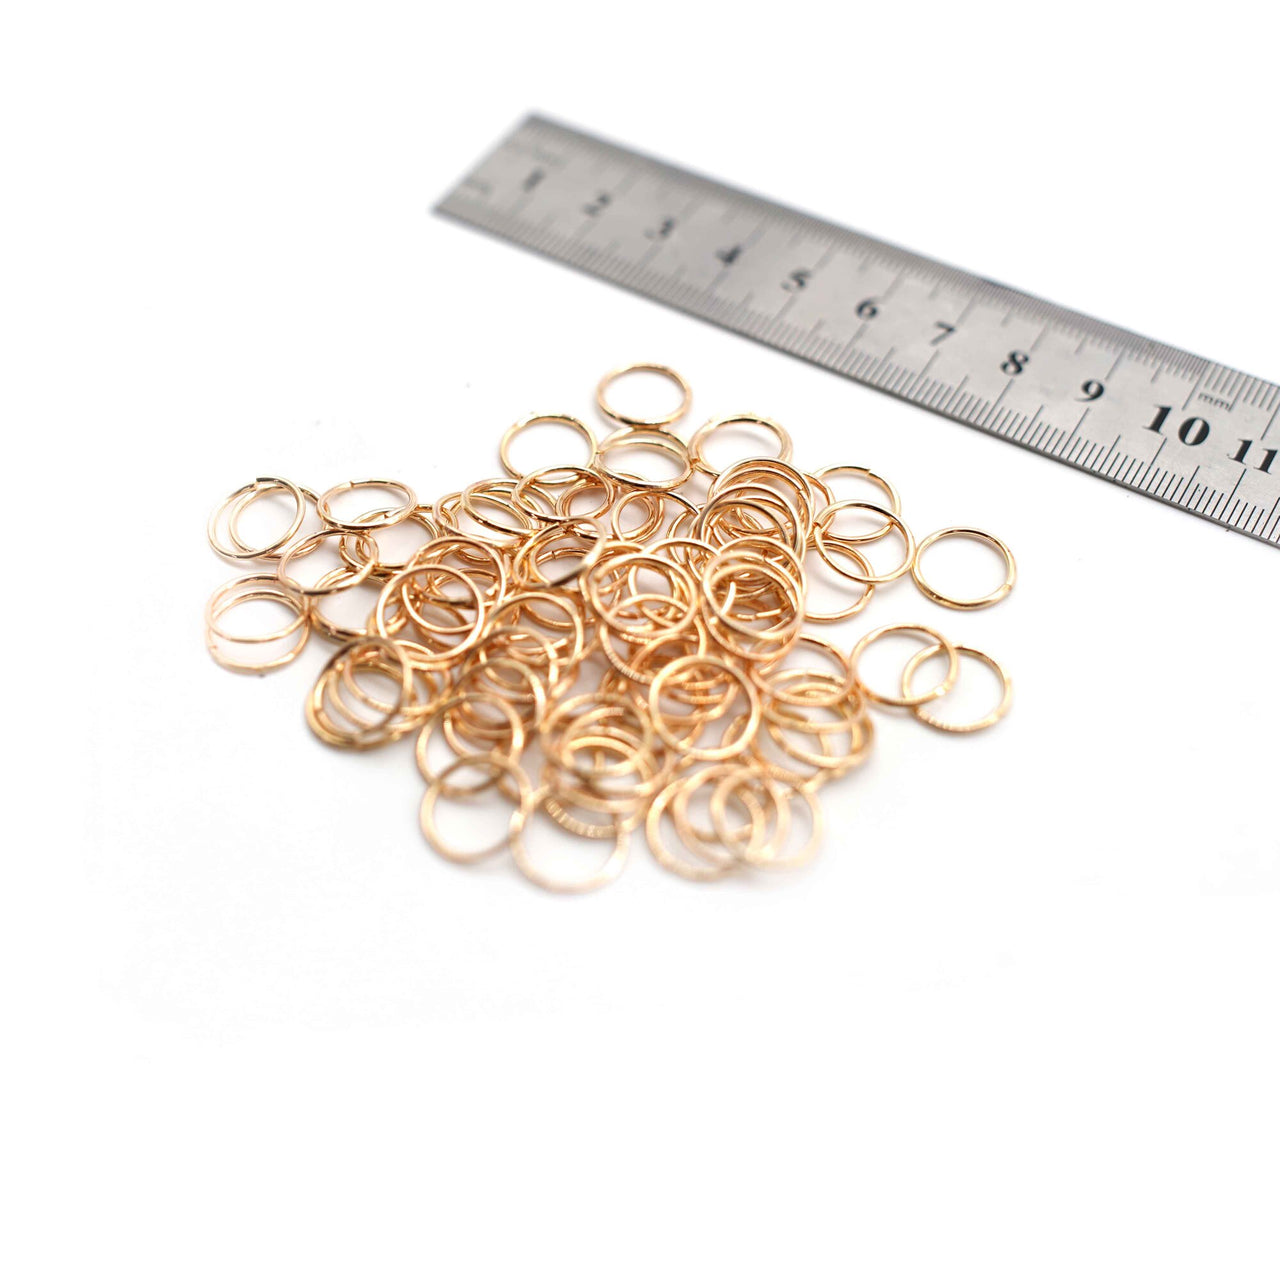 Jump Rings - 12mm - Light Gold - 50g (Approx. 250 Rings)